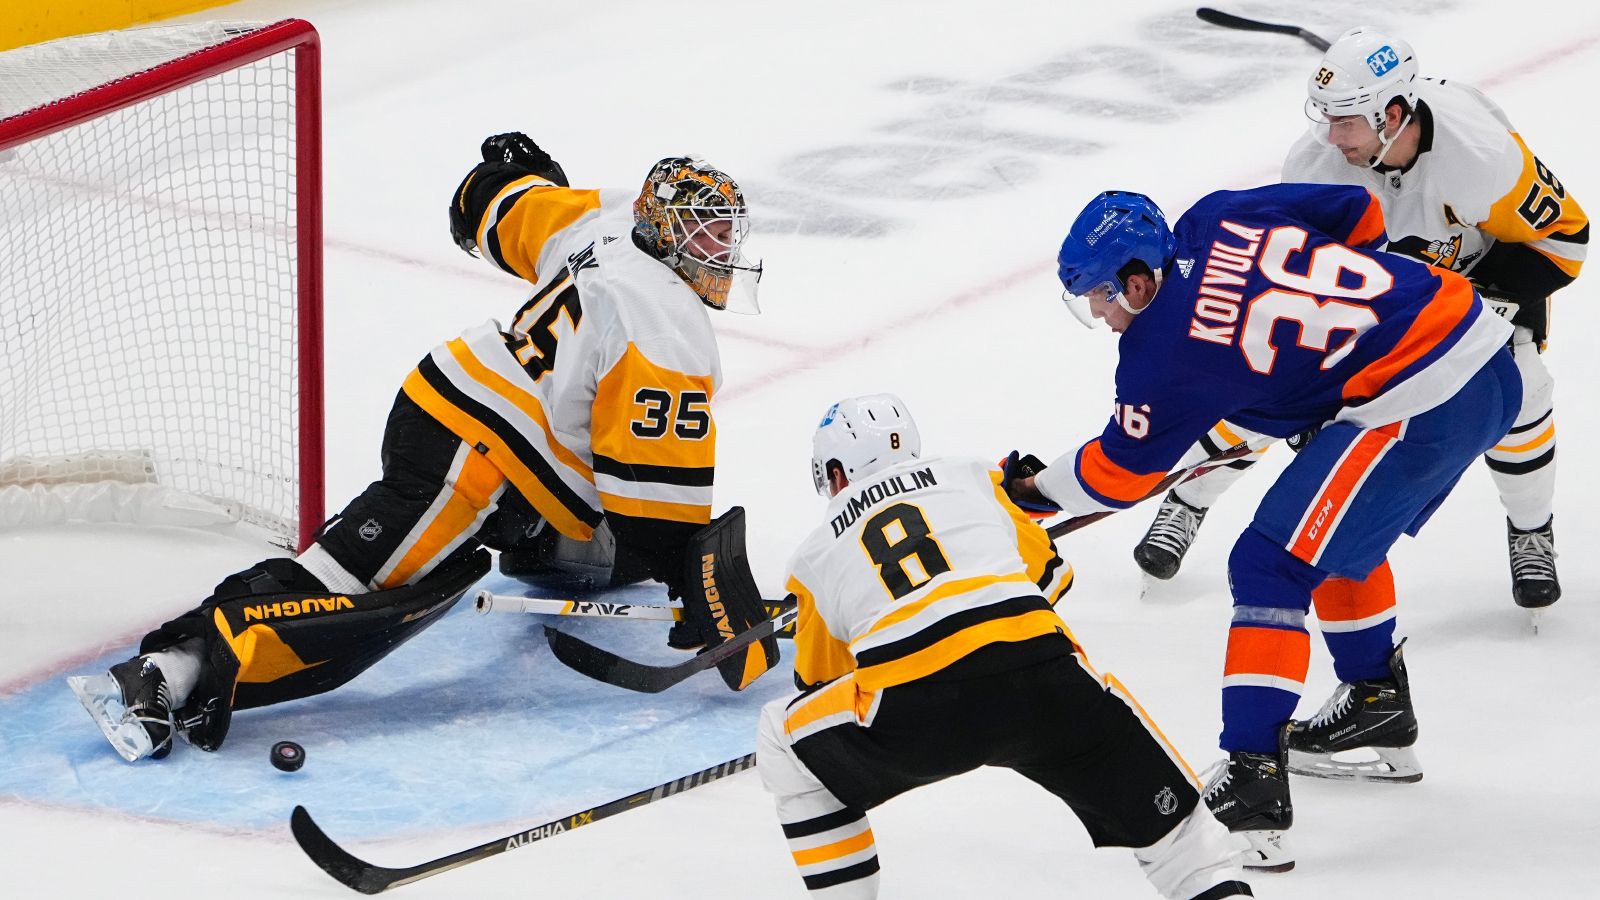 Islanders: The beauty of the Zach Parise and Zdeno Chara contracts